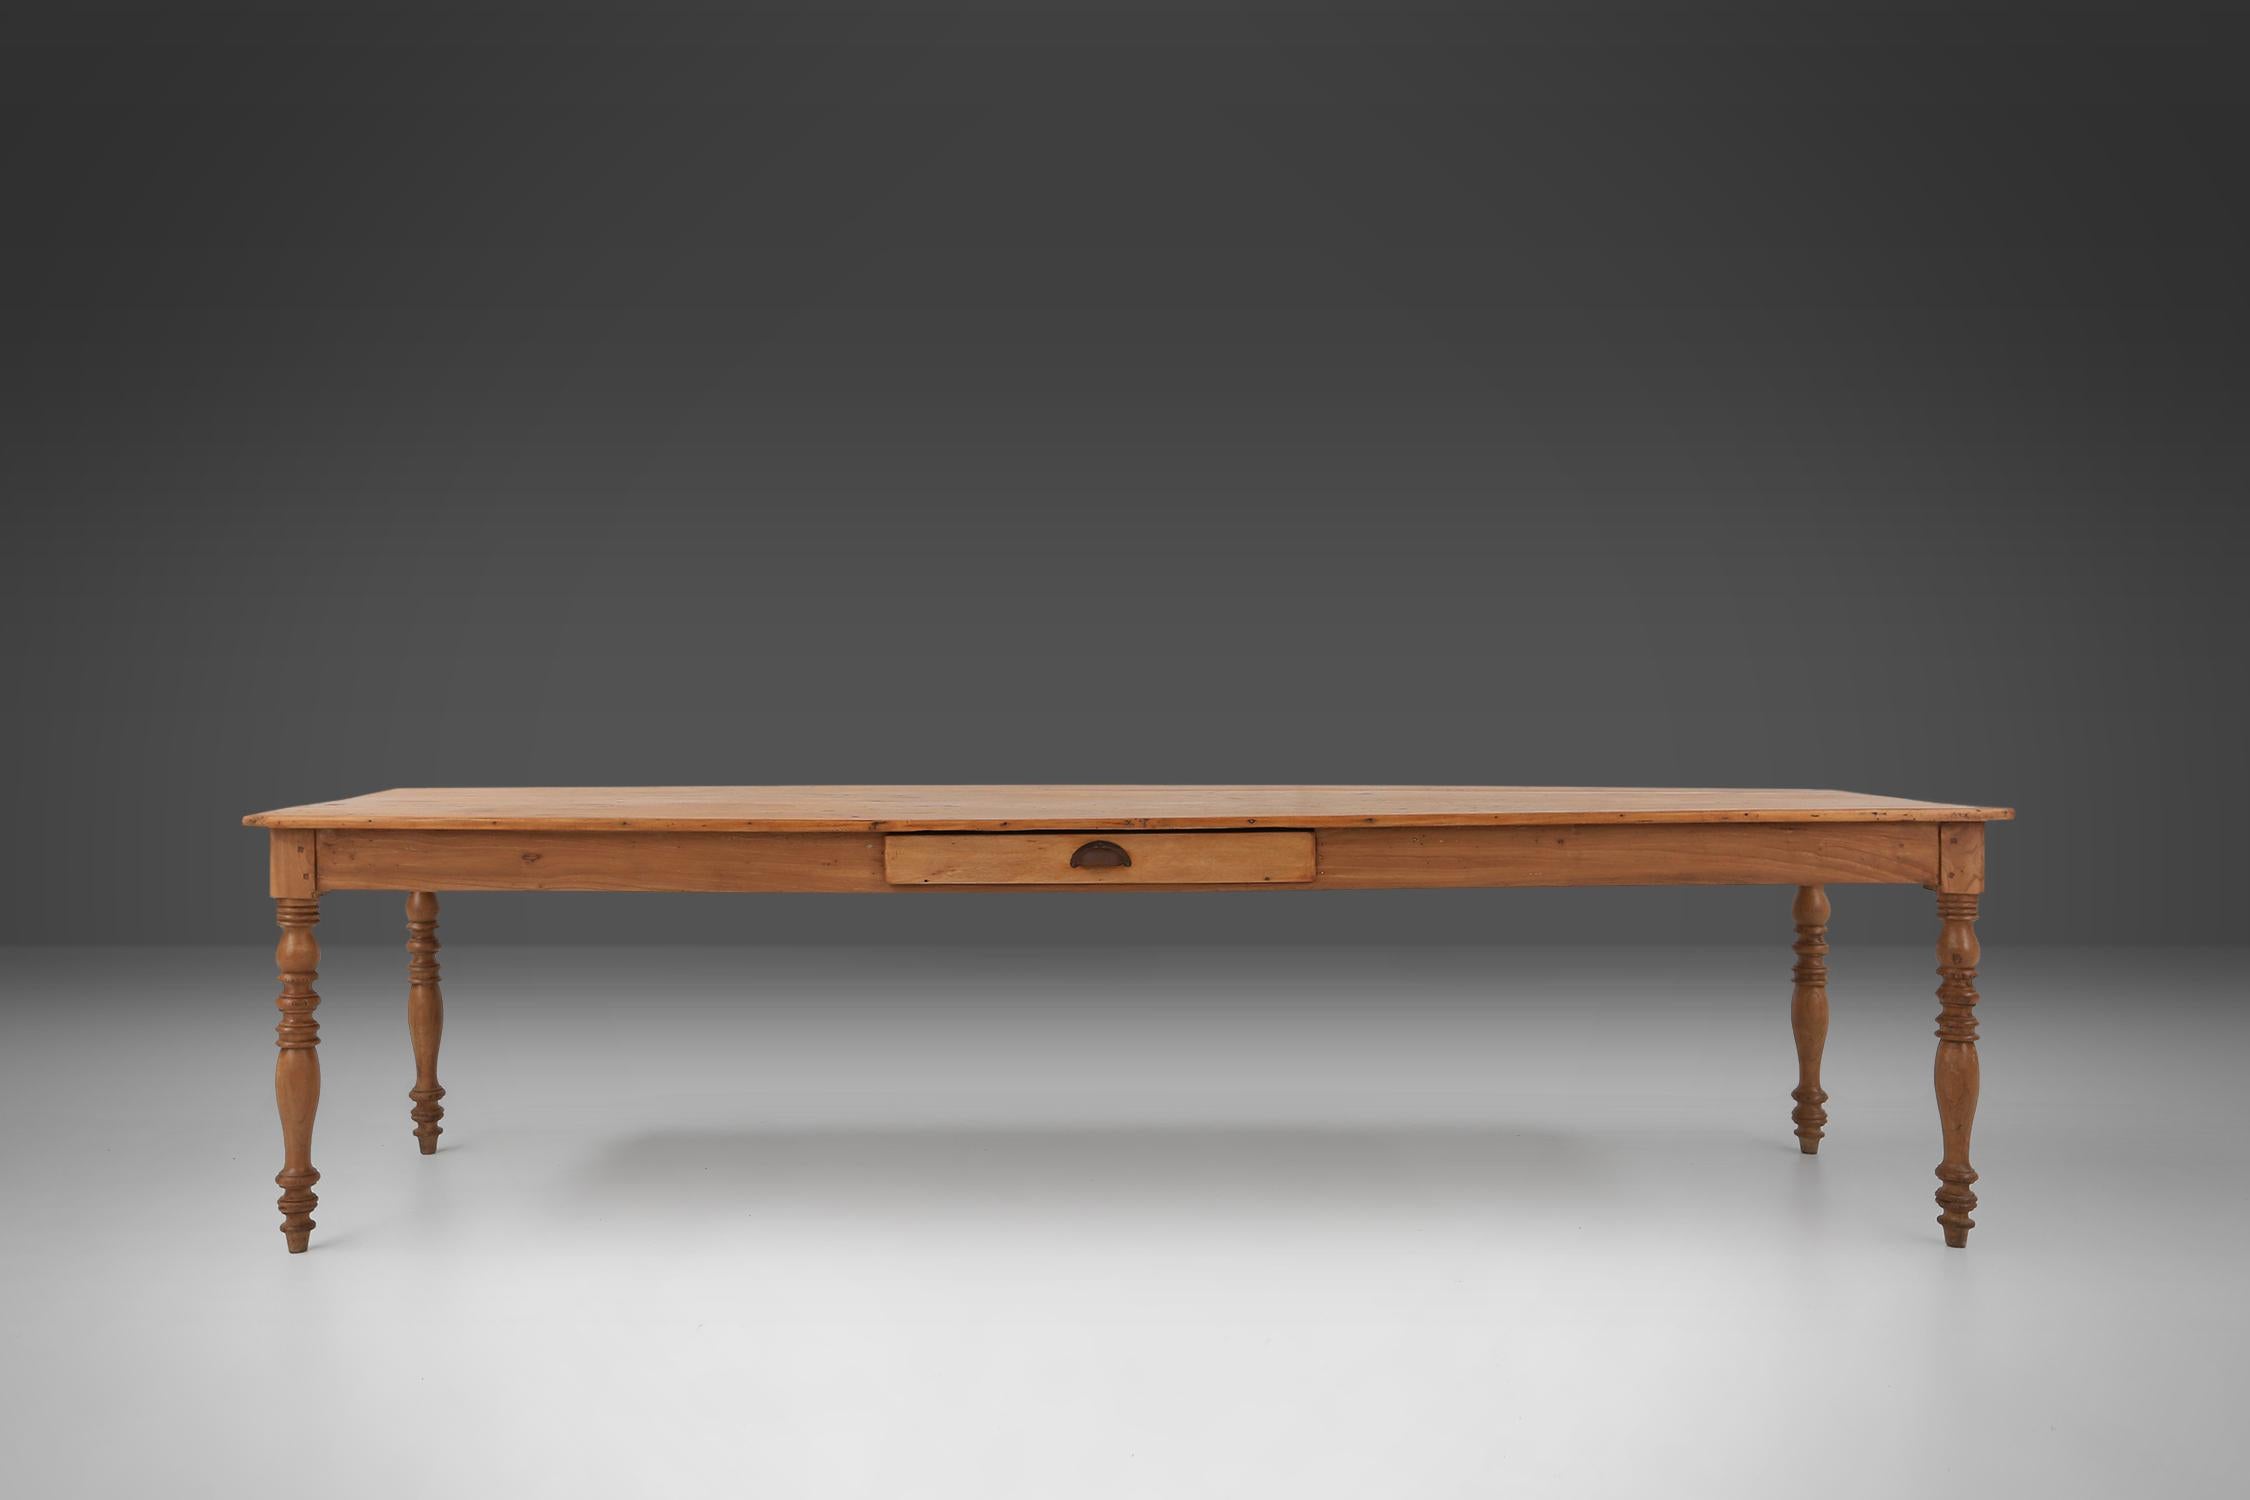 Rustic Large pine wood farm table with drawer and turned legs, France, 1850s